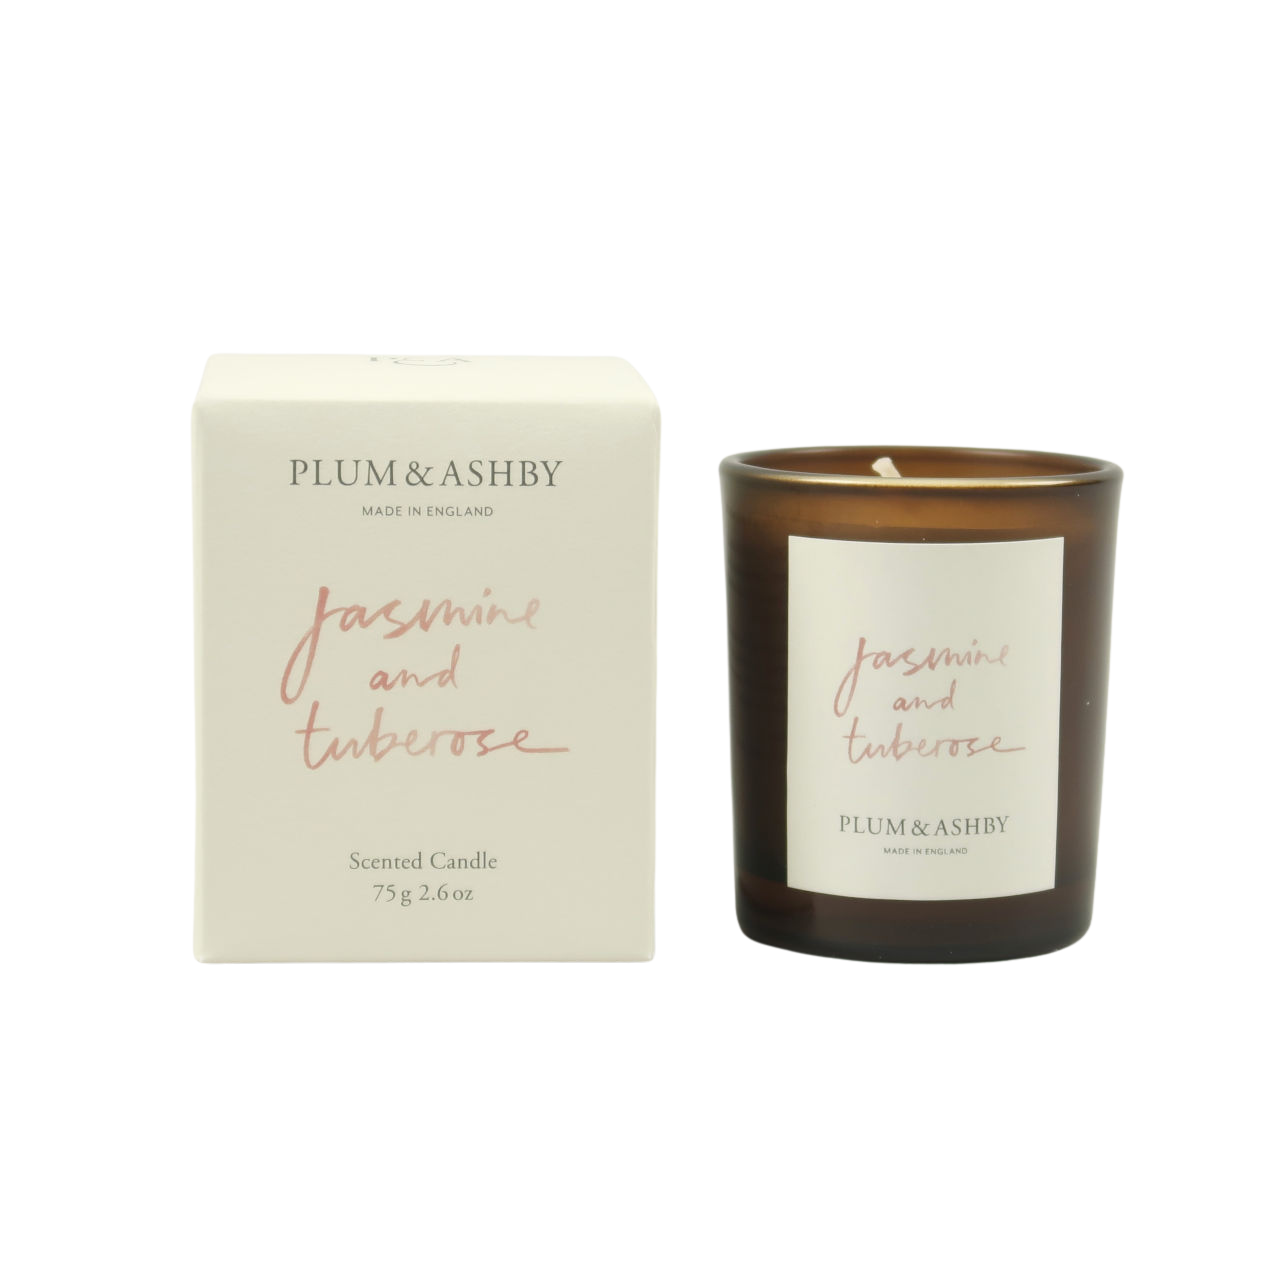 Plum & Ashby  Jasmine and Tuberose Scented Candle - Small